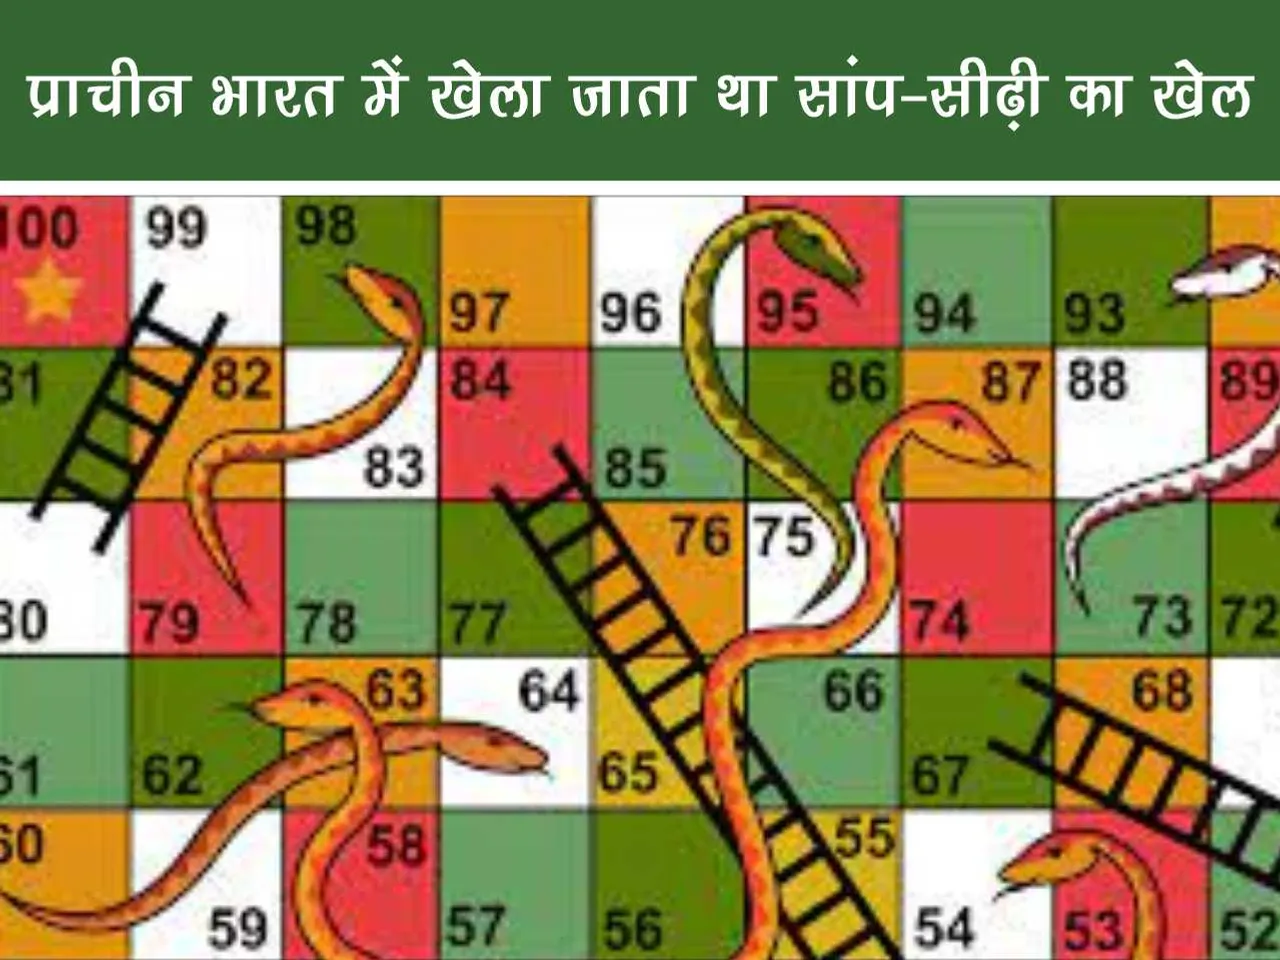 Snakes and Ladder 